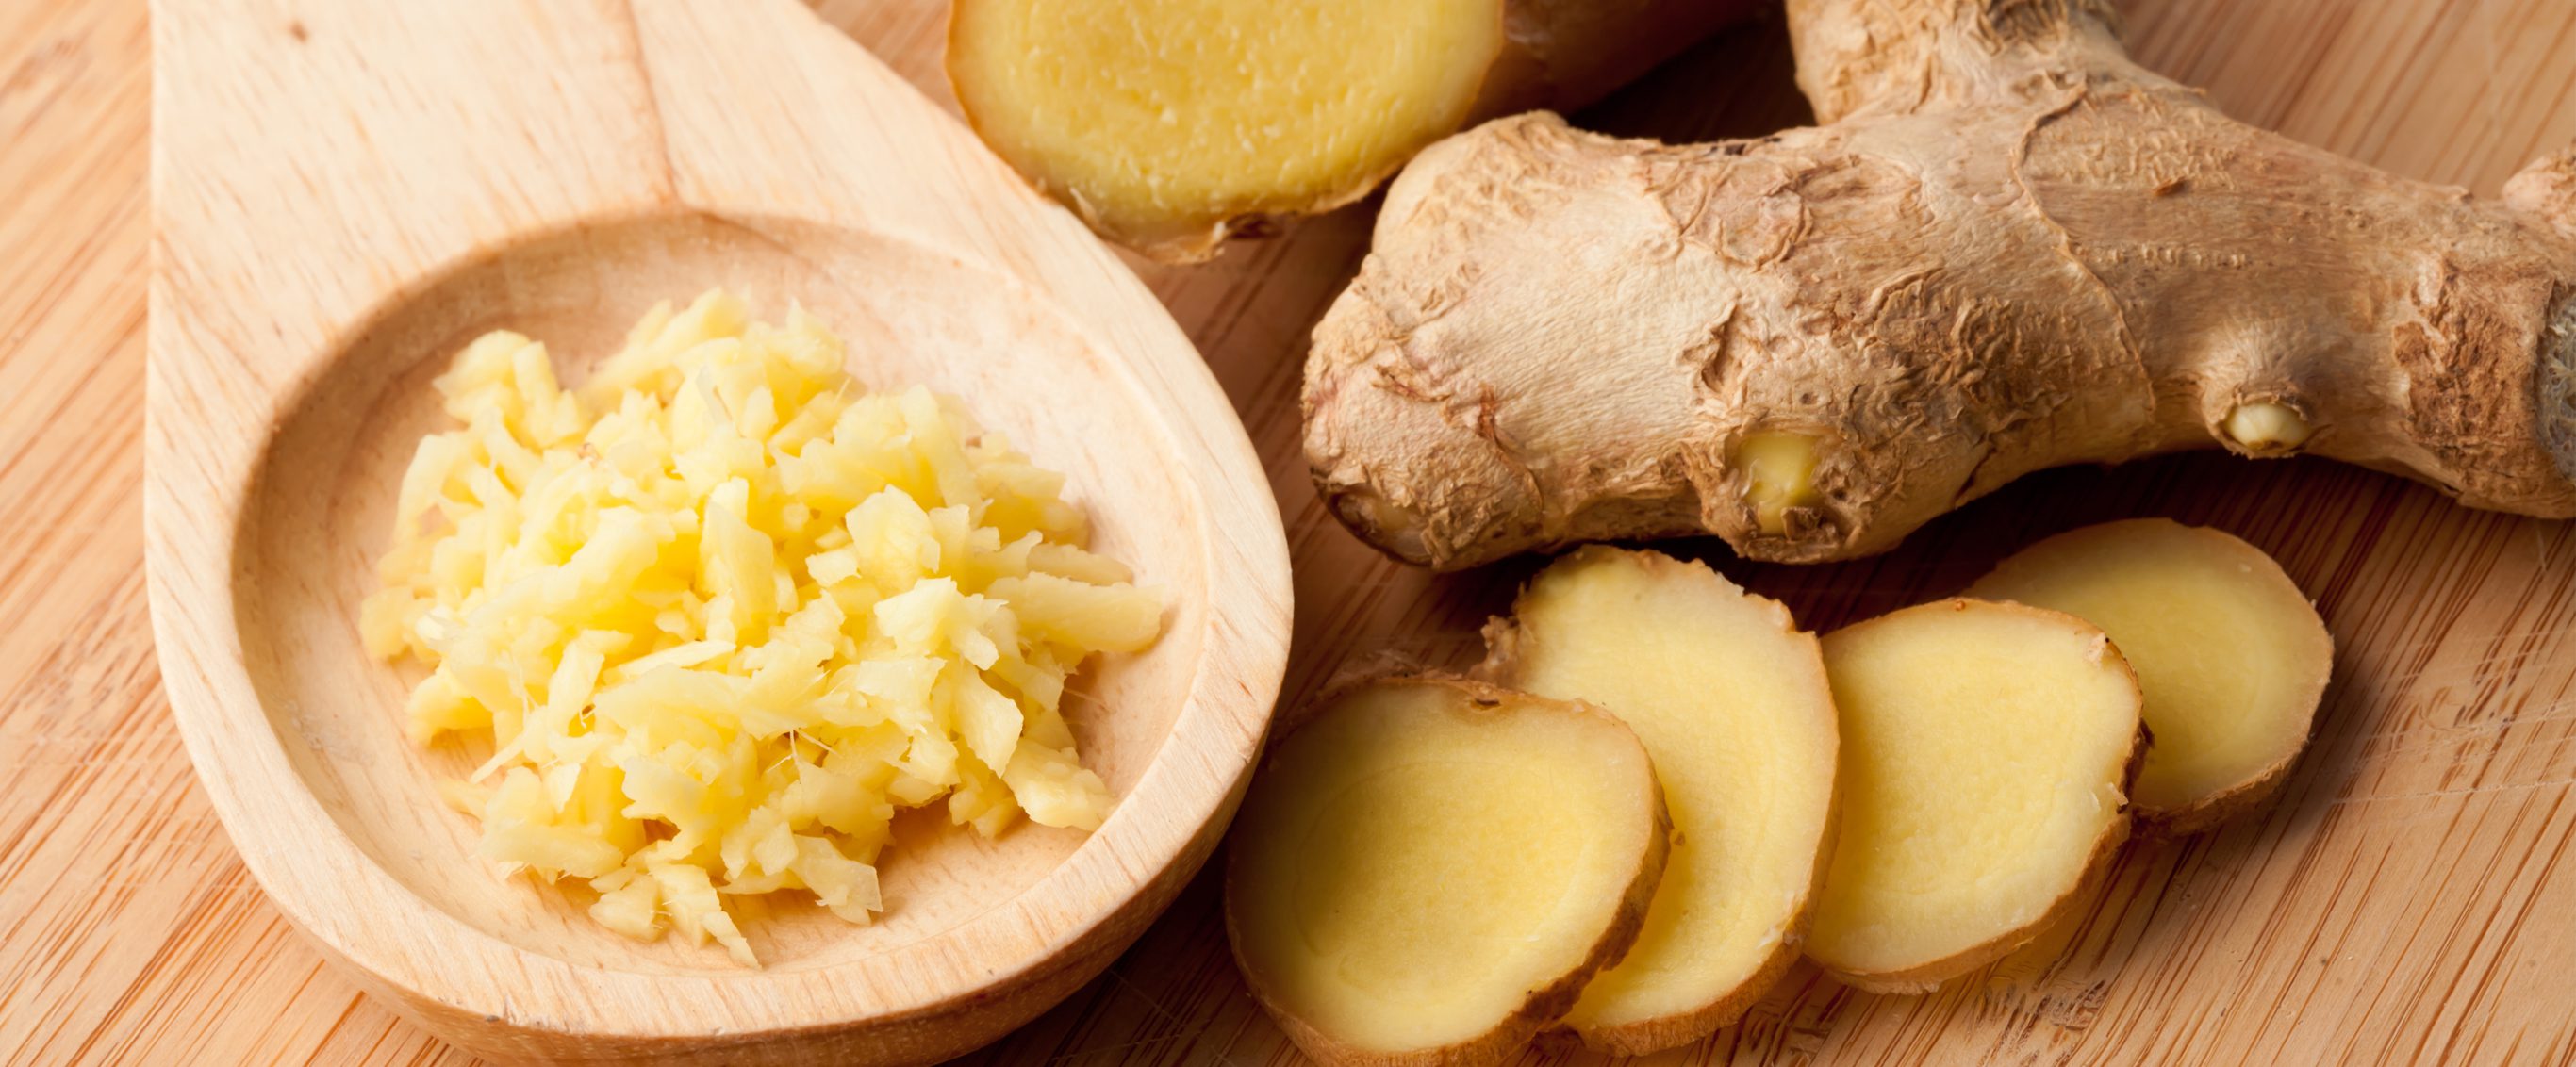 How to Choose, Store, and Prepare Fresh Ginger - Forks Over Knives